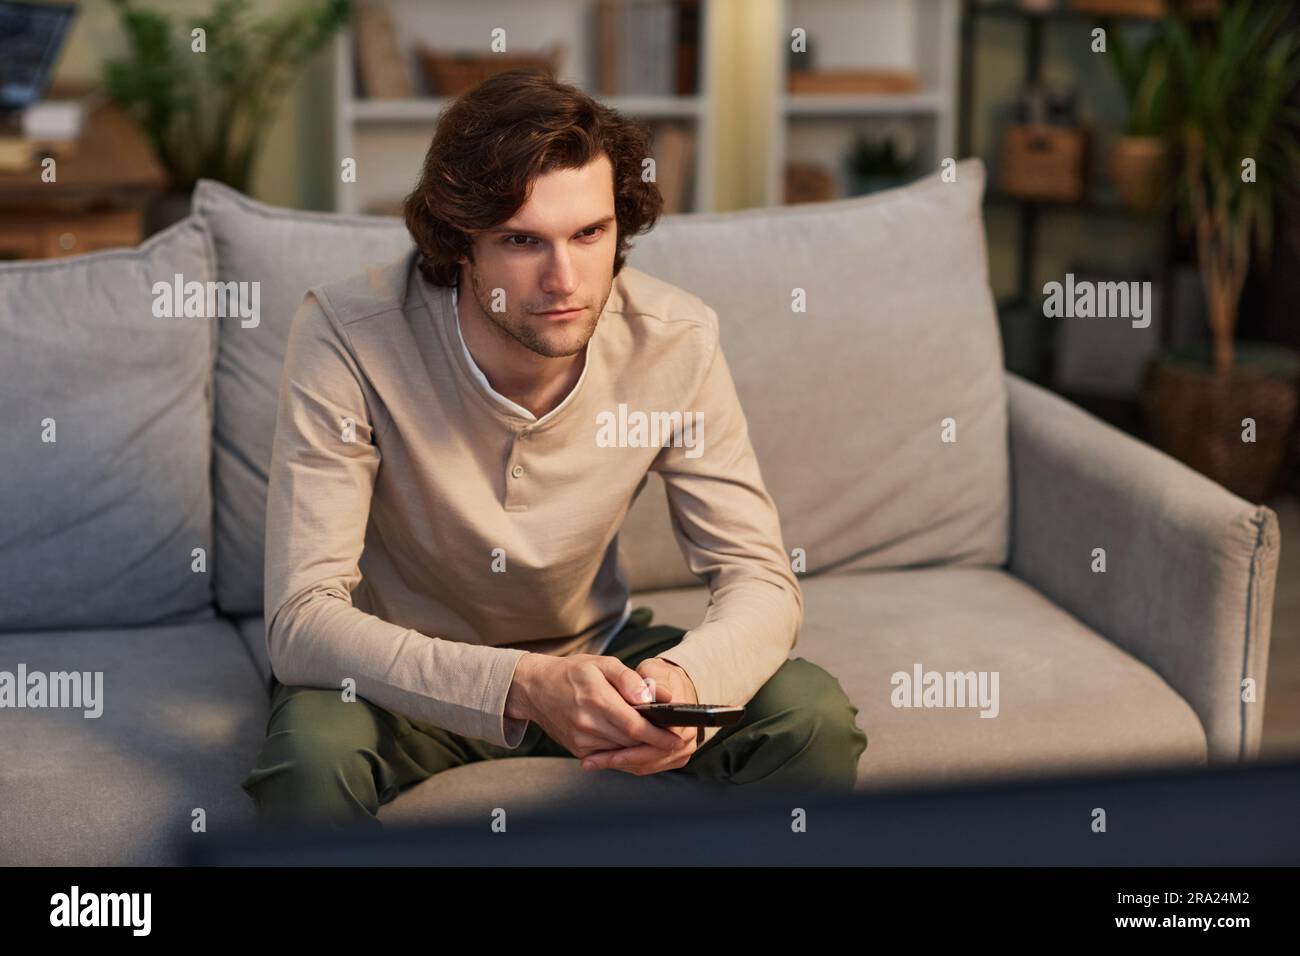 Portrait of young man watching TV at home sitting on sofa in cozy green interior, copy space Stock Photo